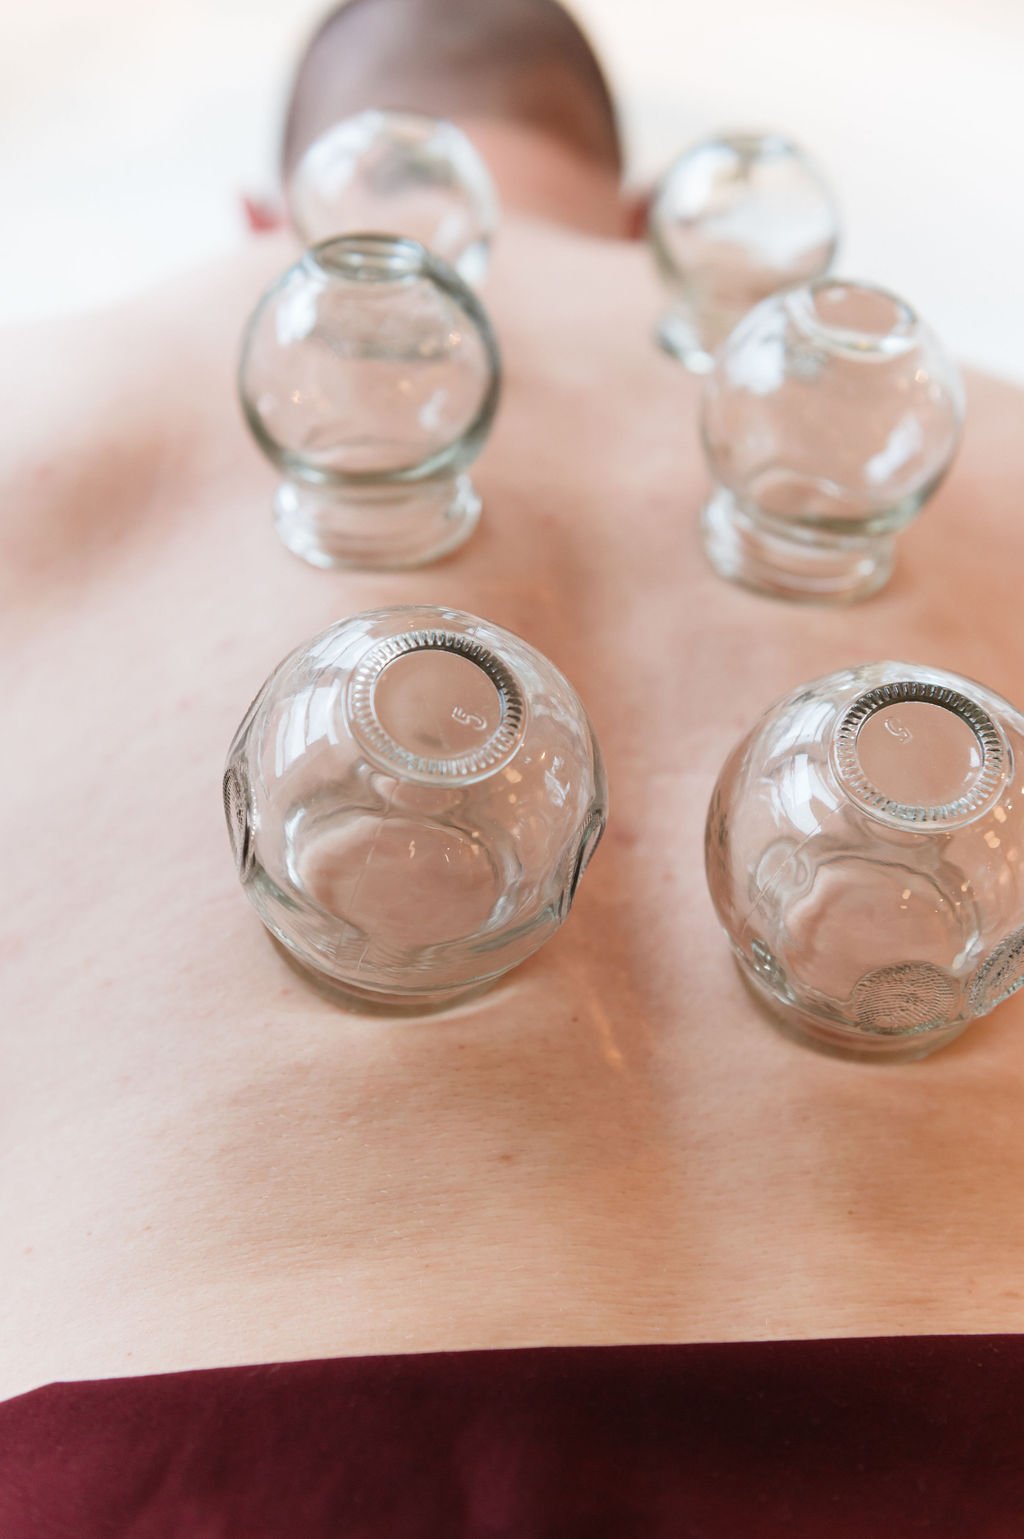 A man lying on his back with four glass jars on his back. Captured in a Portland brand photography.